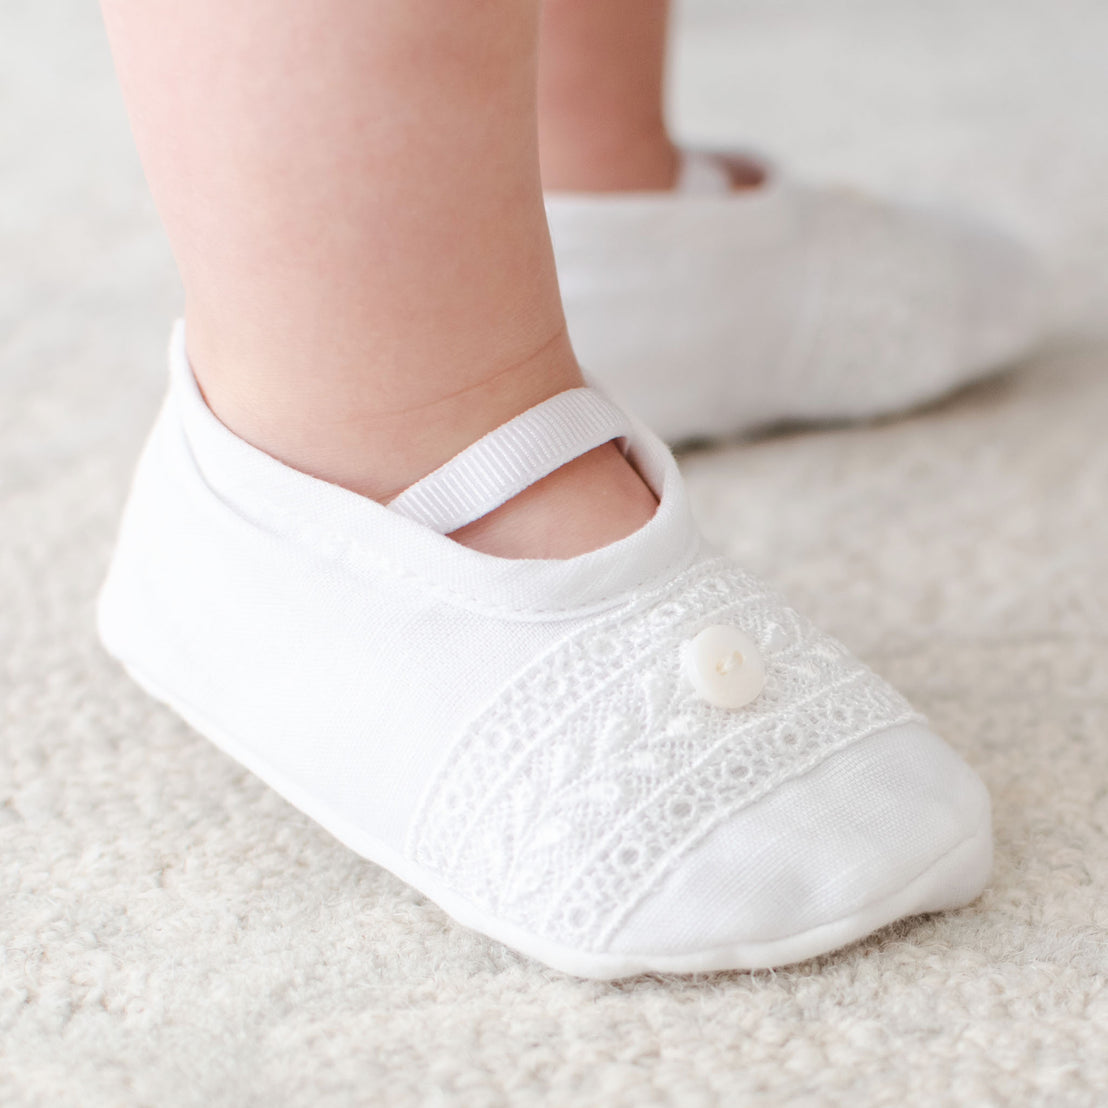 The top detail of the Oliver Booties in white worn by a baby boy. The Oliver booties are made with a linen top, soft pima cotton bottom, and features a Venice lace and button detail (with elastic strap across the foot).